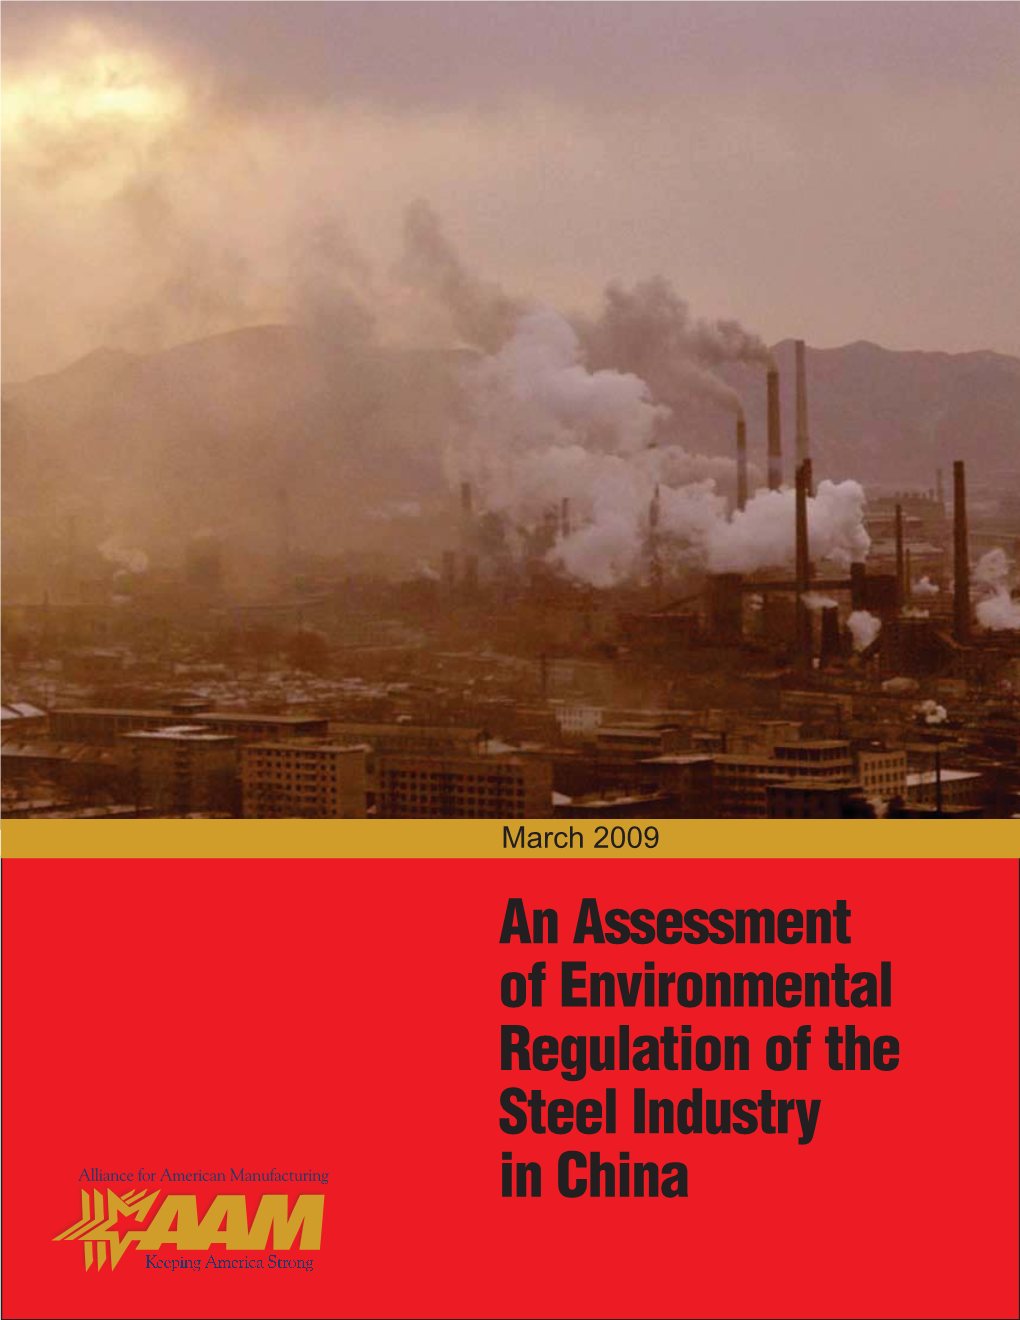 An Assessment of Environmental Regulation of the Steel Industry in China